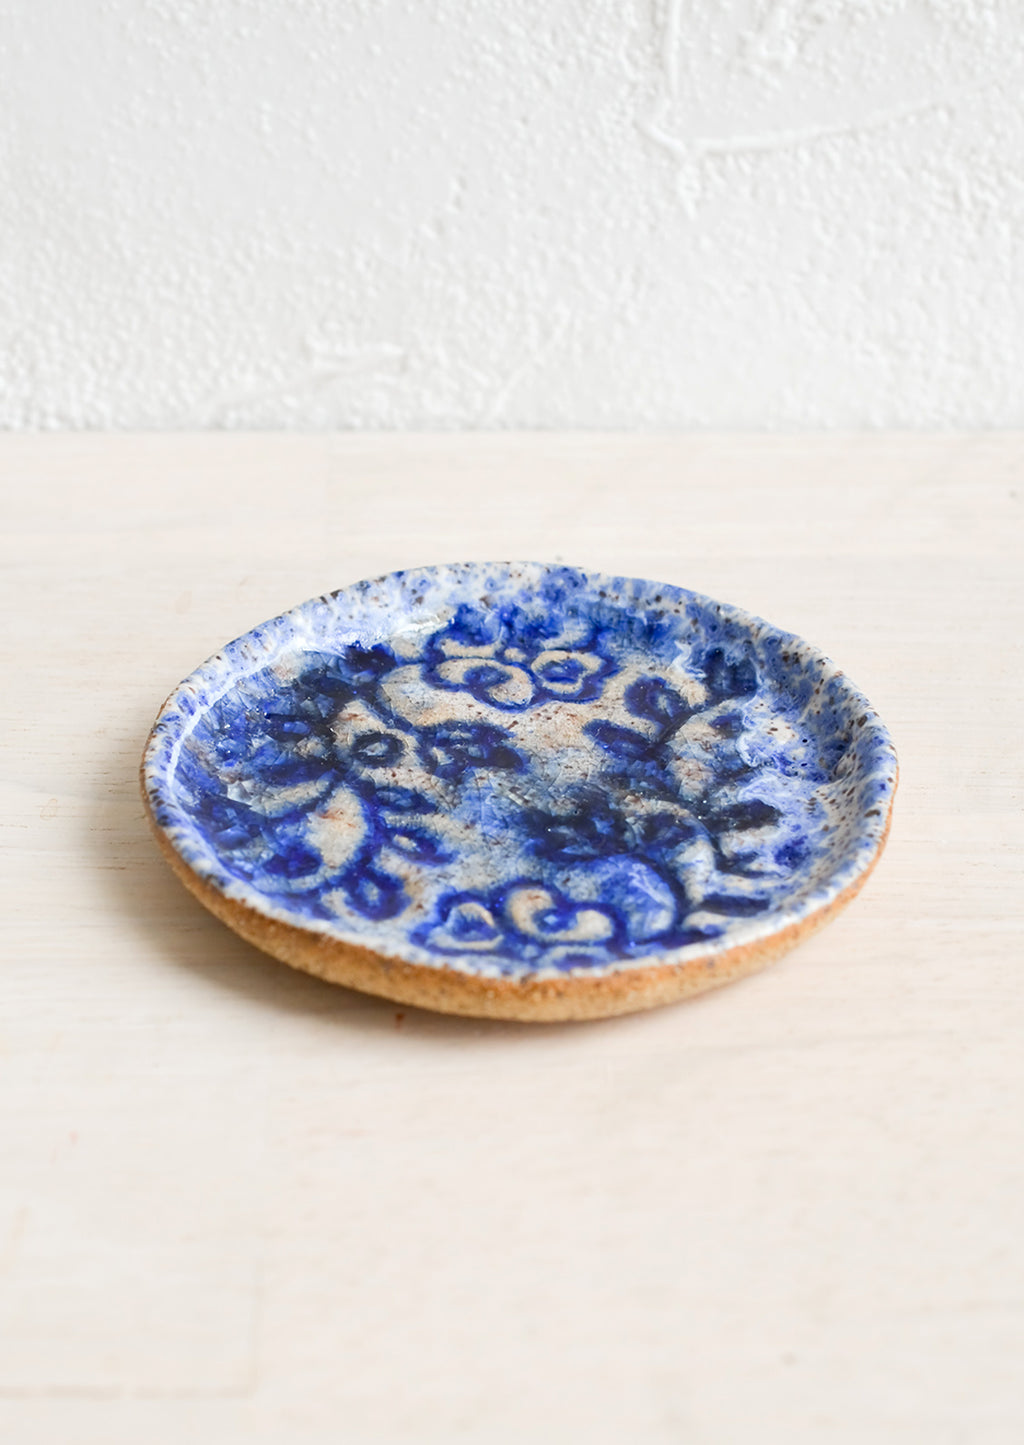 2: A round ceramic dish with floral imprint and blue glaze.